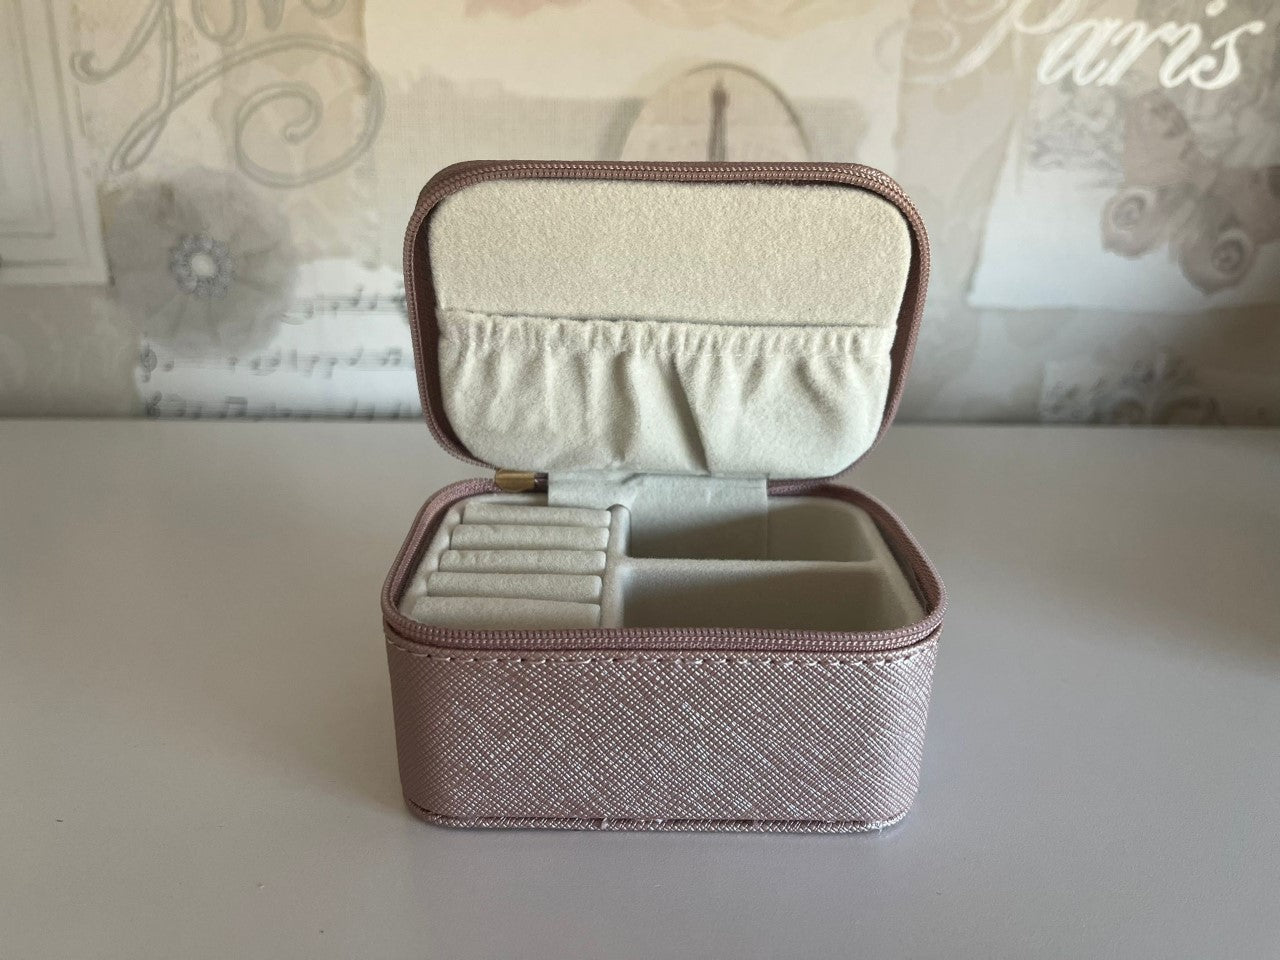 Personalised Jewellery box - be your own kind of beautiful Gemma